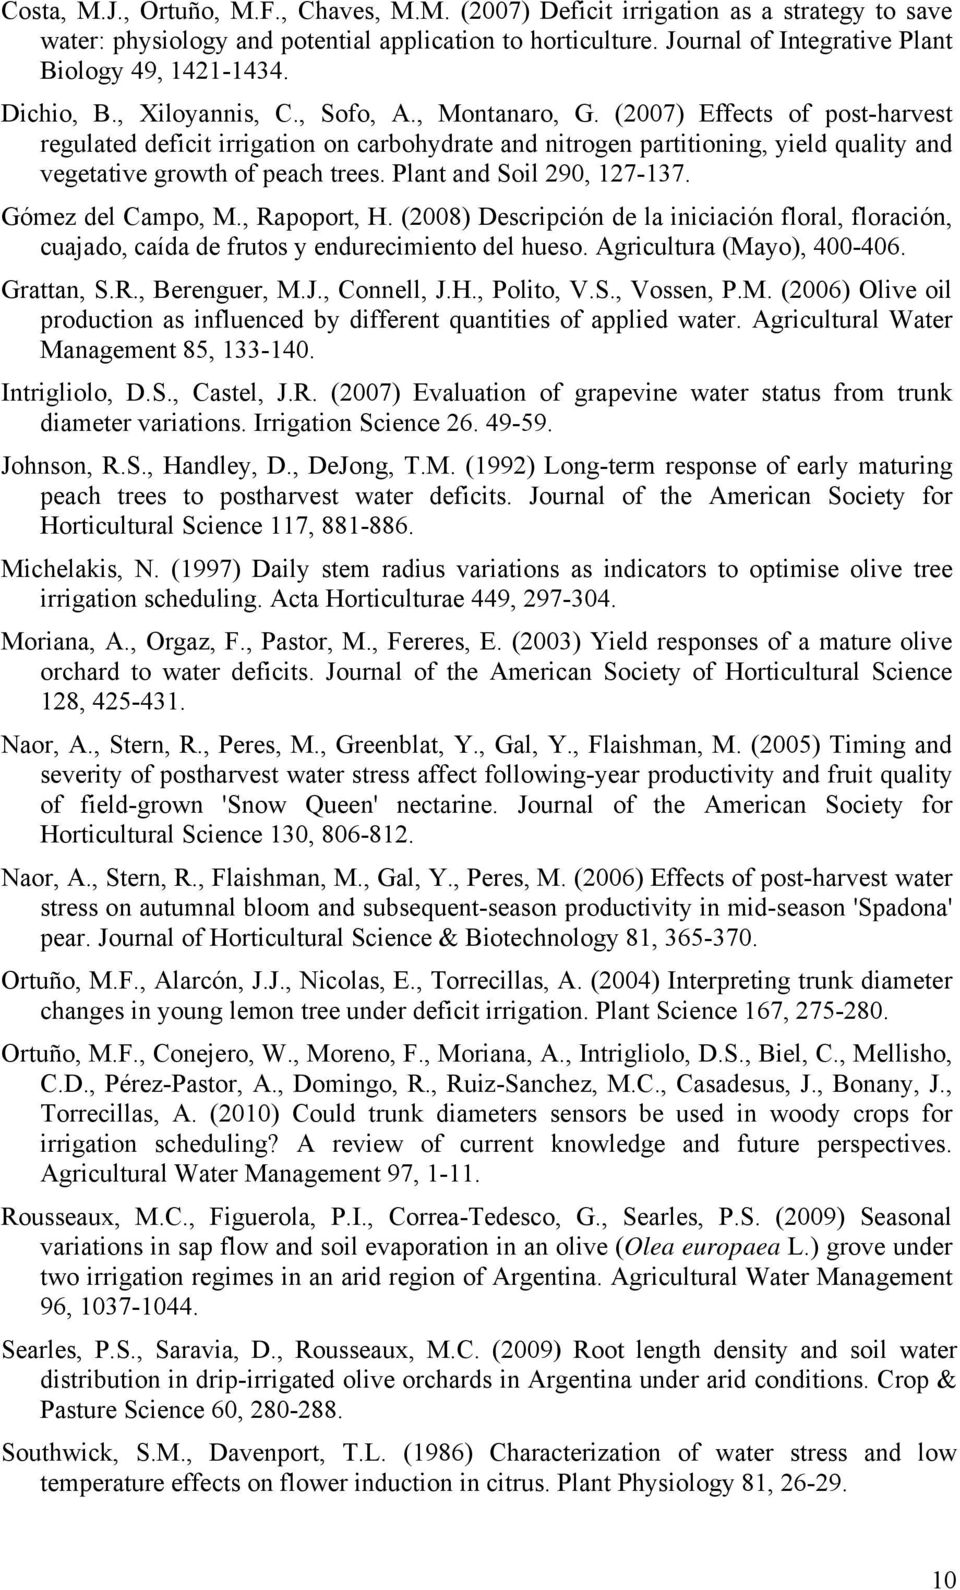 (2007) Effects of post-harvest regulated deficit irrigation on carbohydrate and nitrogen partitioning, yield quality and vegetative growth of peach trees. Plant and Soil 290, 127-137.